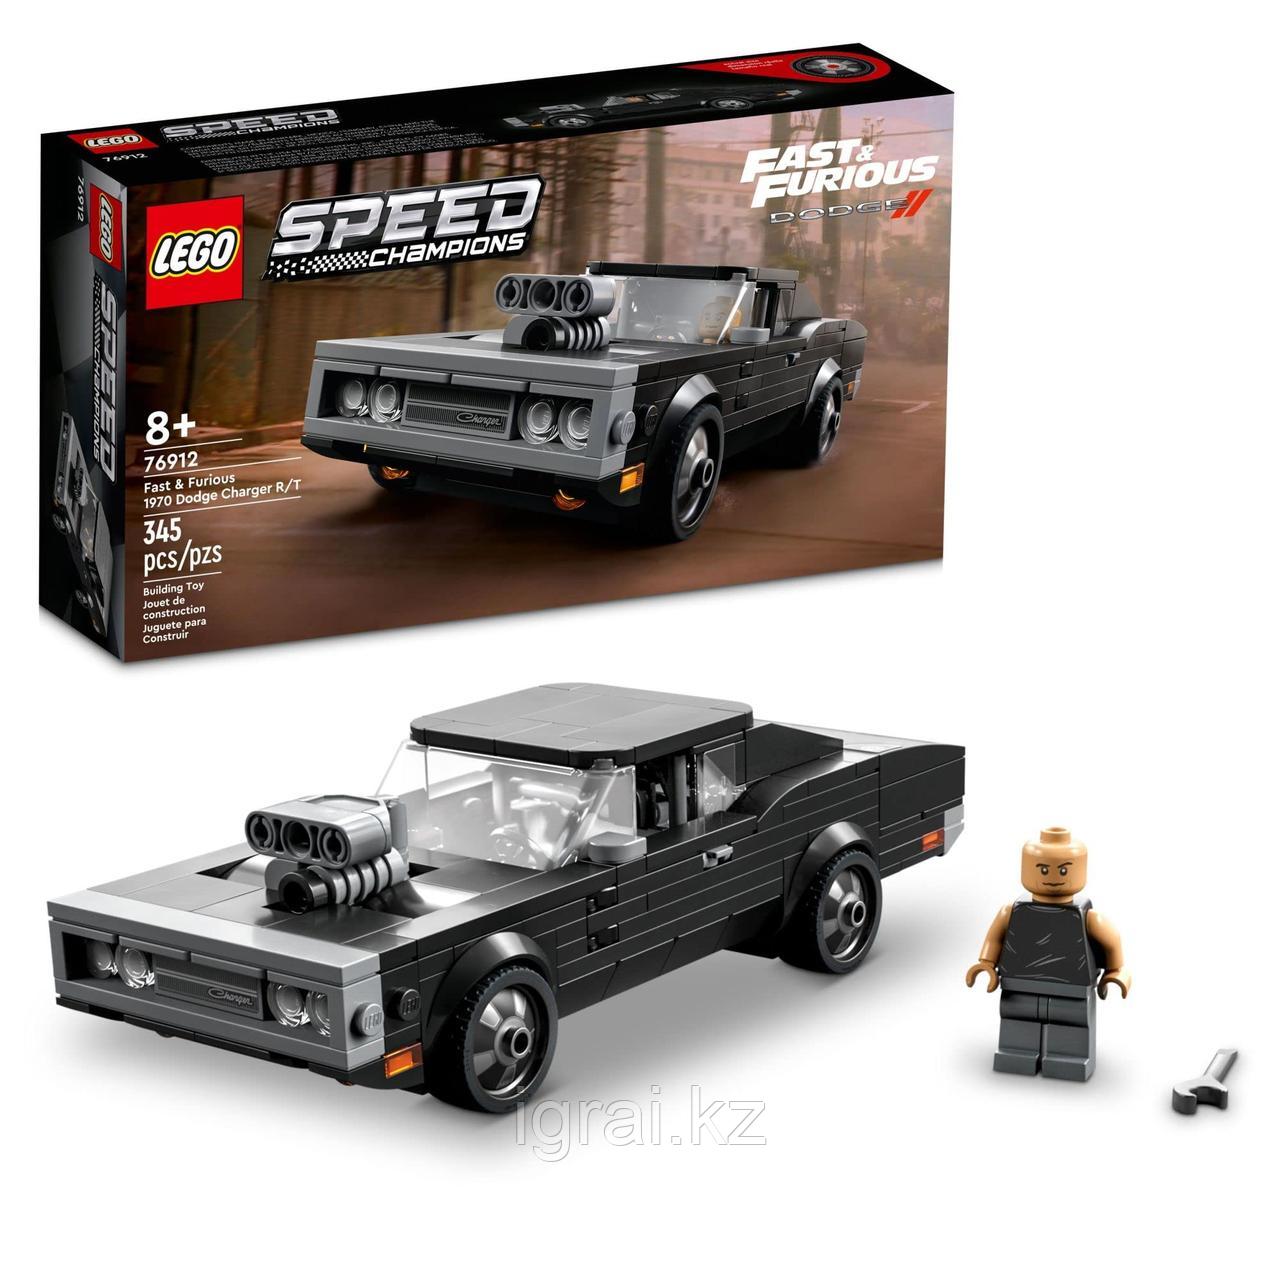 Lego 76912 Speed Champions Fast & Furious 1970 Dodge Charger R/T - фото 1 - id-p105696253